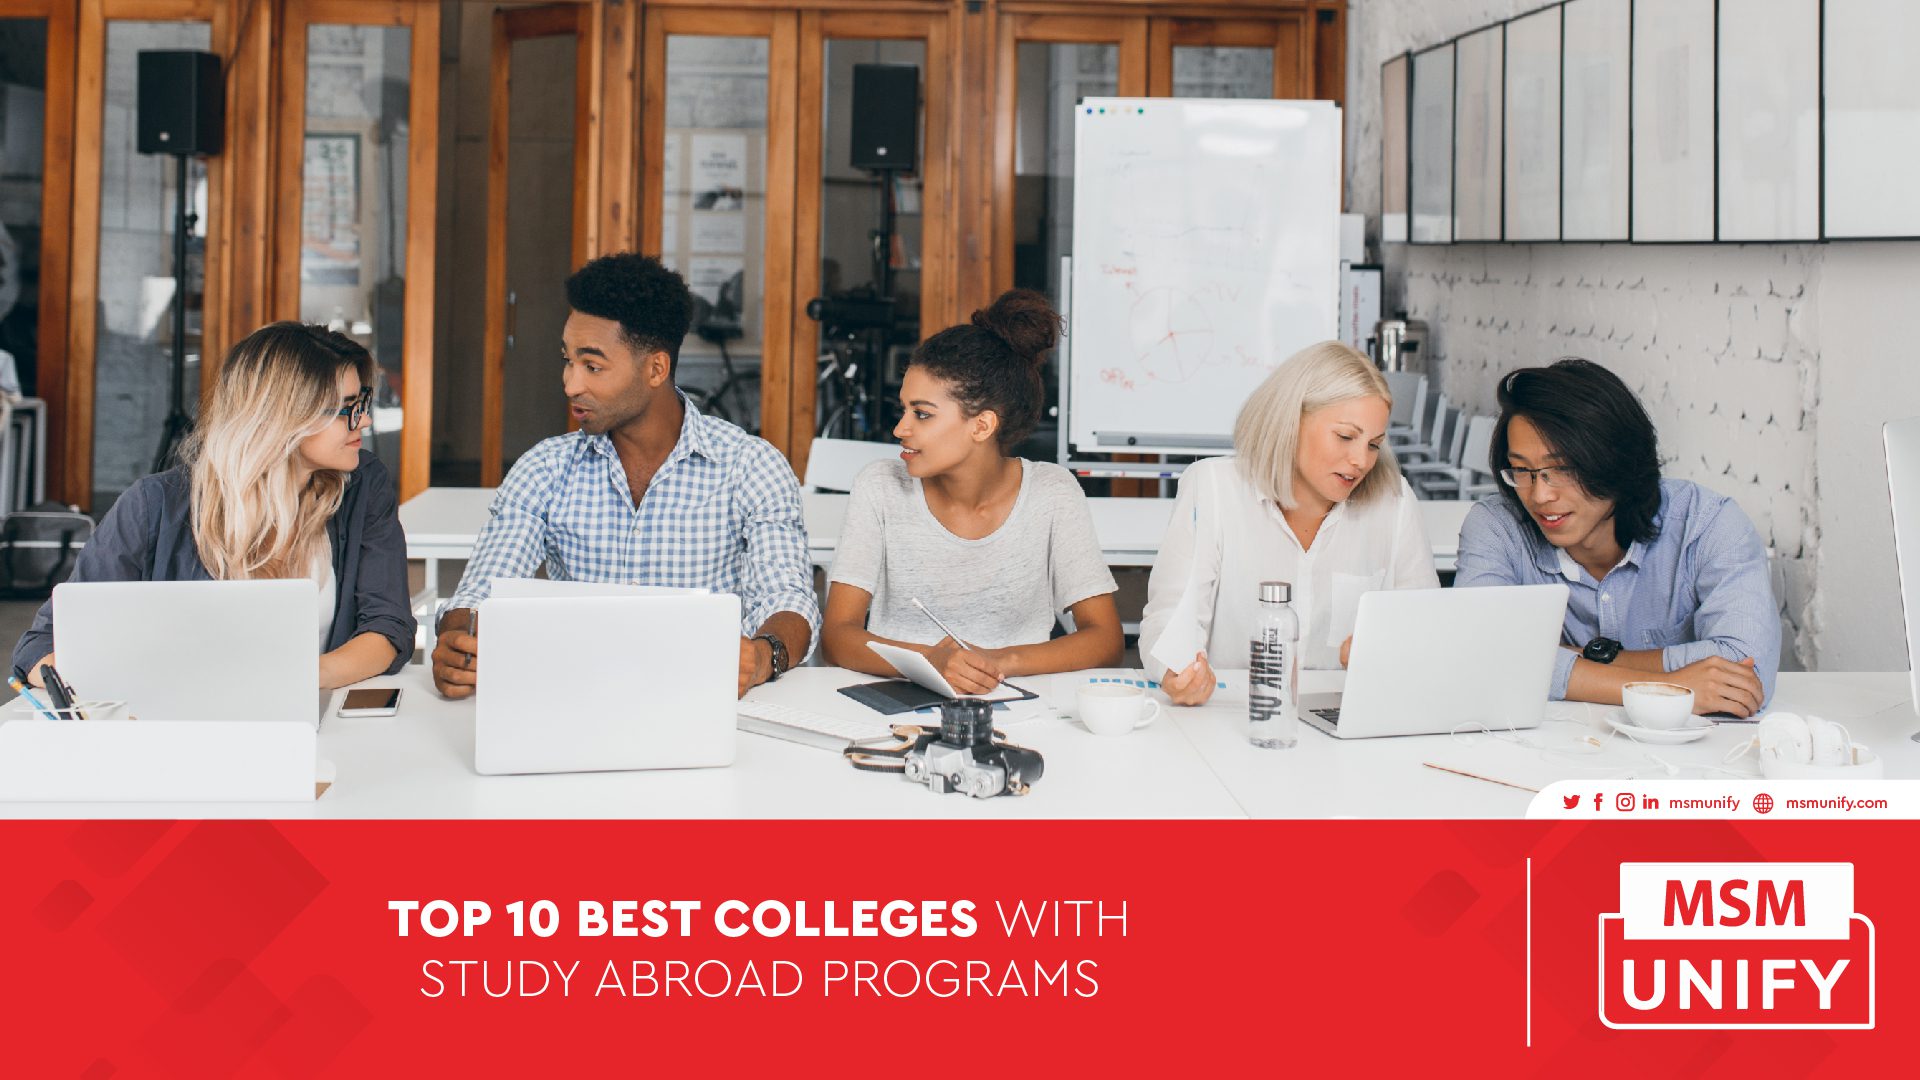 Dalset klassisk silhuet Top 10 Best Colleges With Study Abroad Programs | MSM Unify